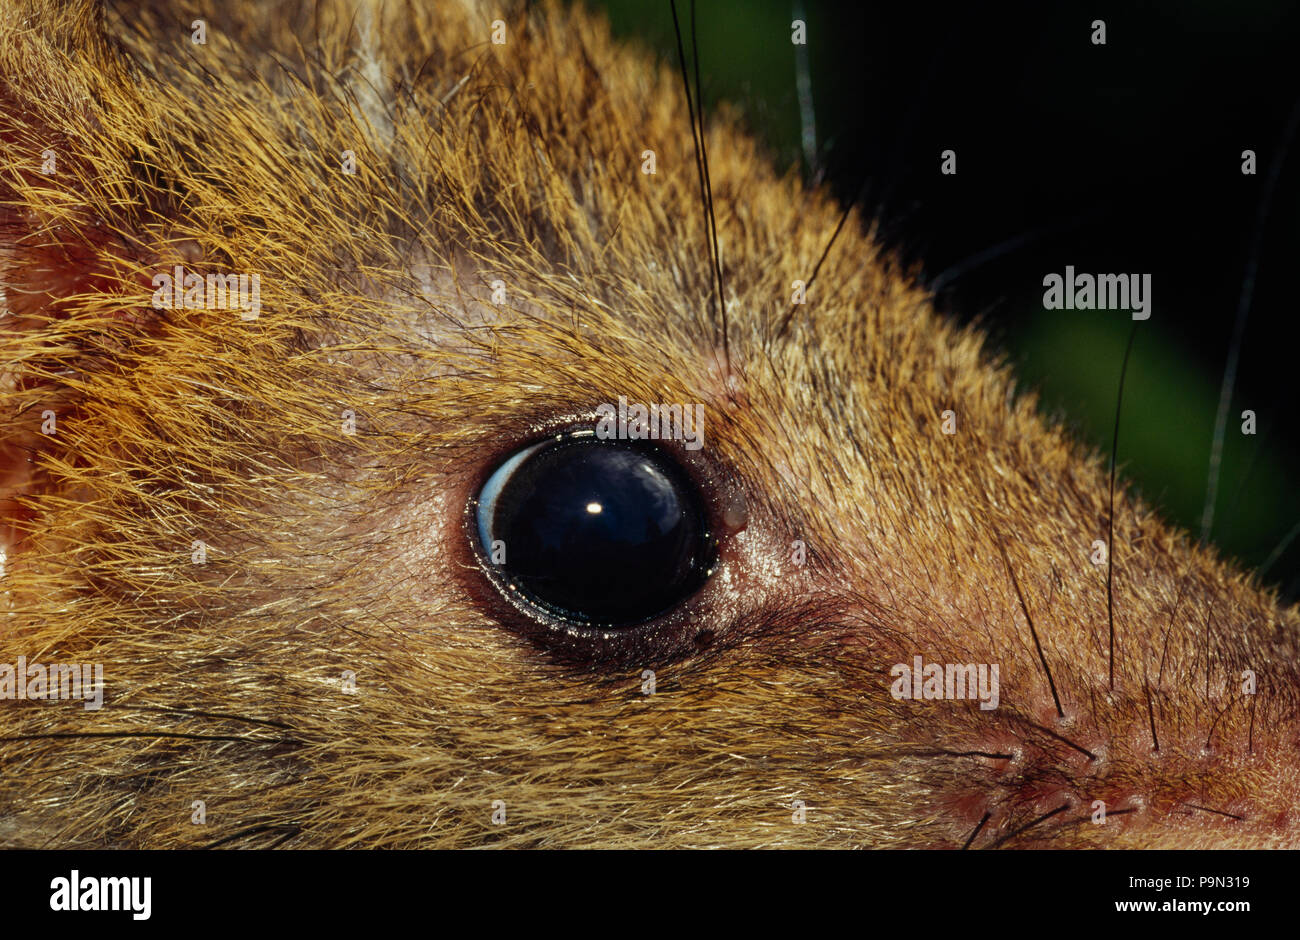 A closeup of the eye of the marsupial carnivore, the Spotted Quoll. Stock Photo